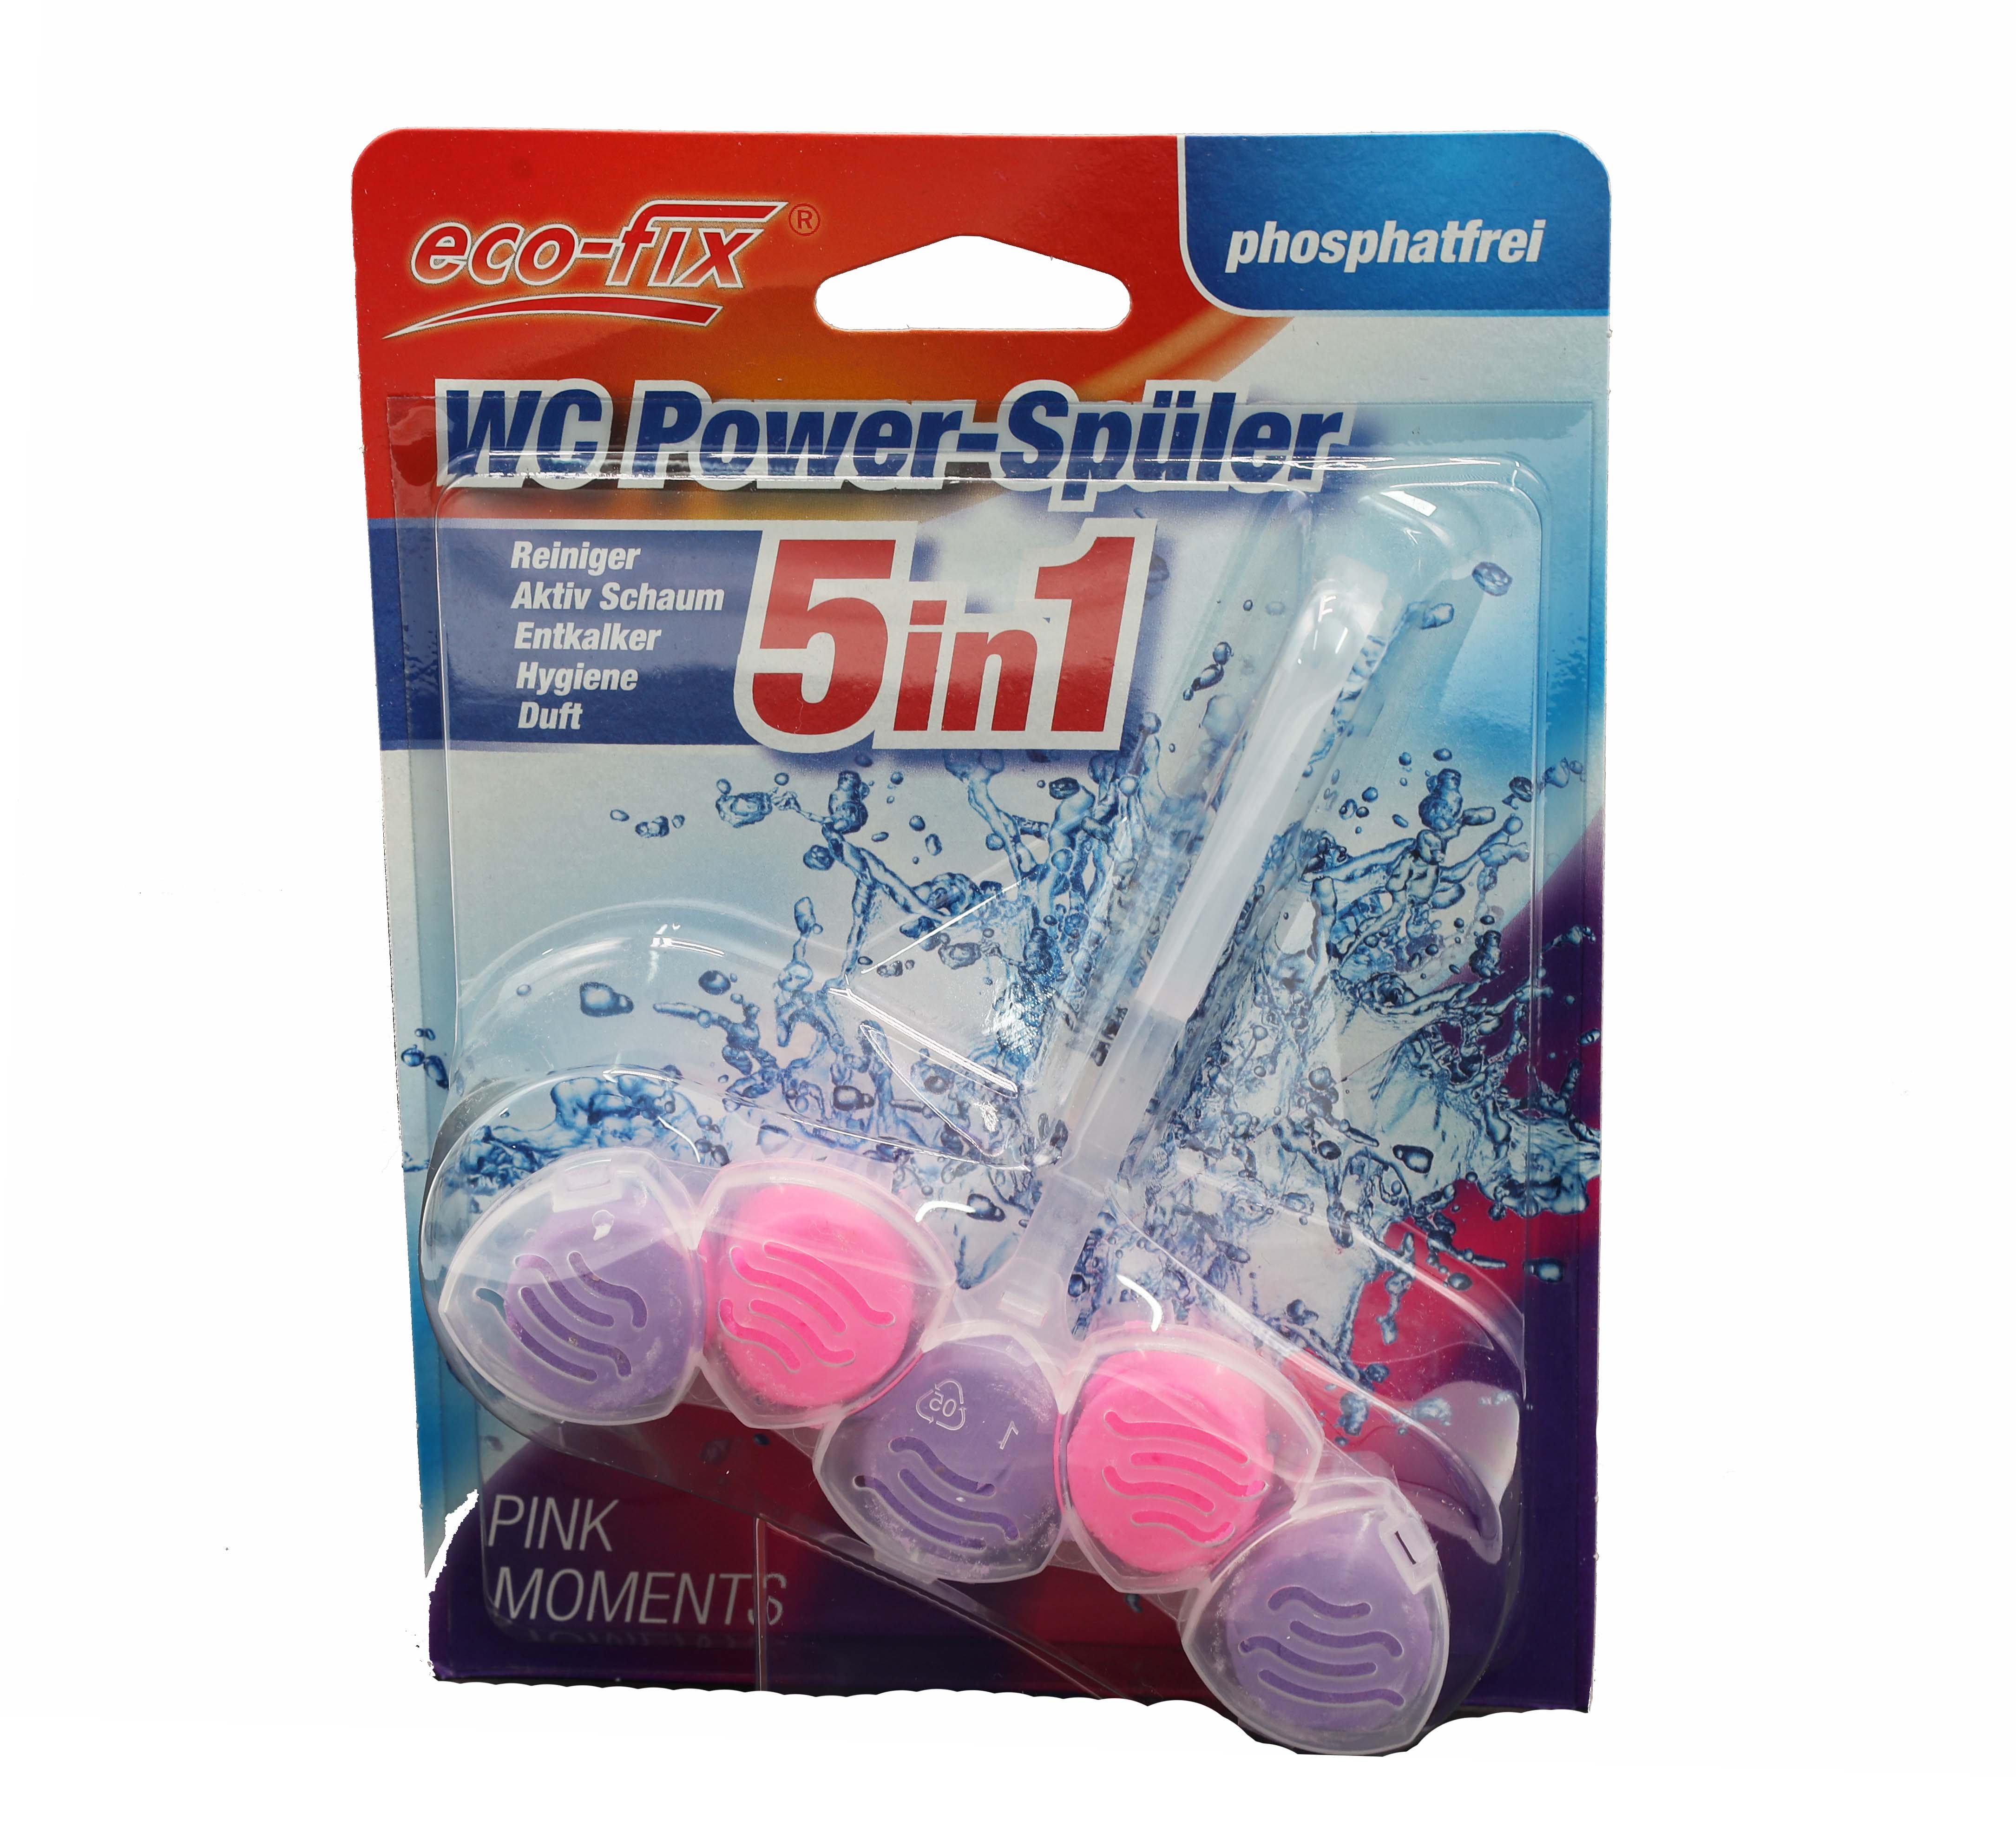 eco-fix WC Power Spüler 5in1 Pink Moments 50 g